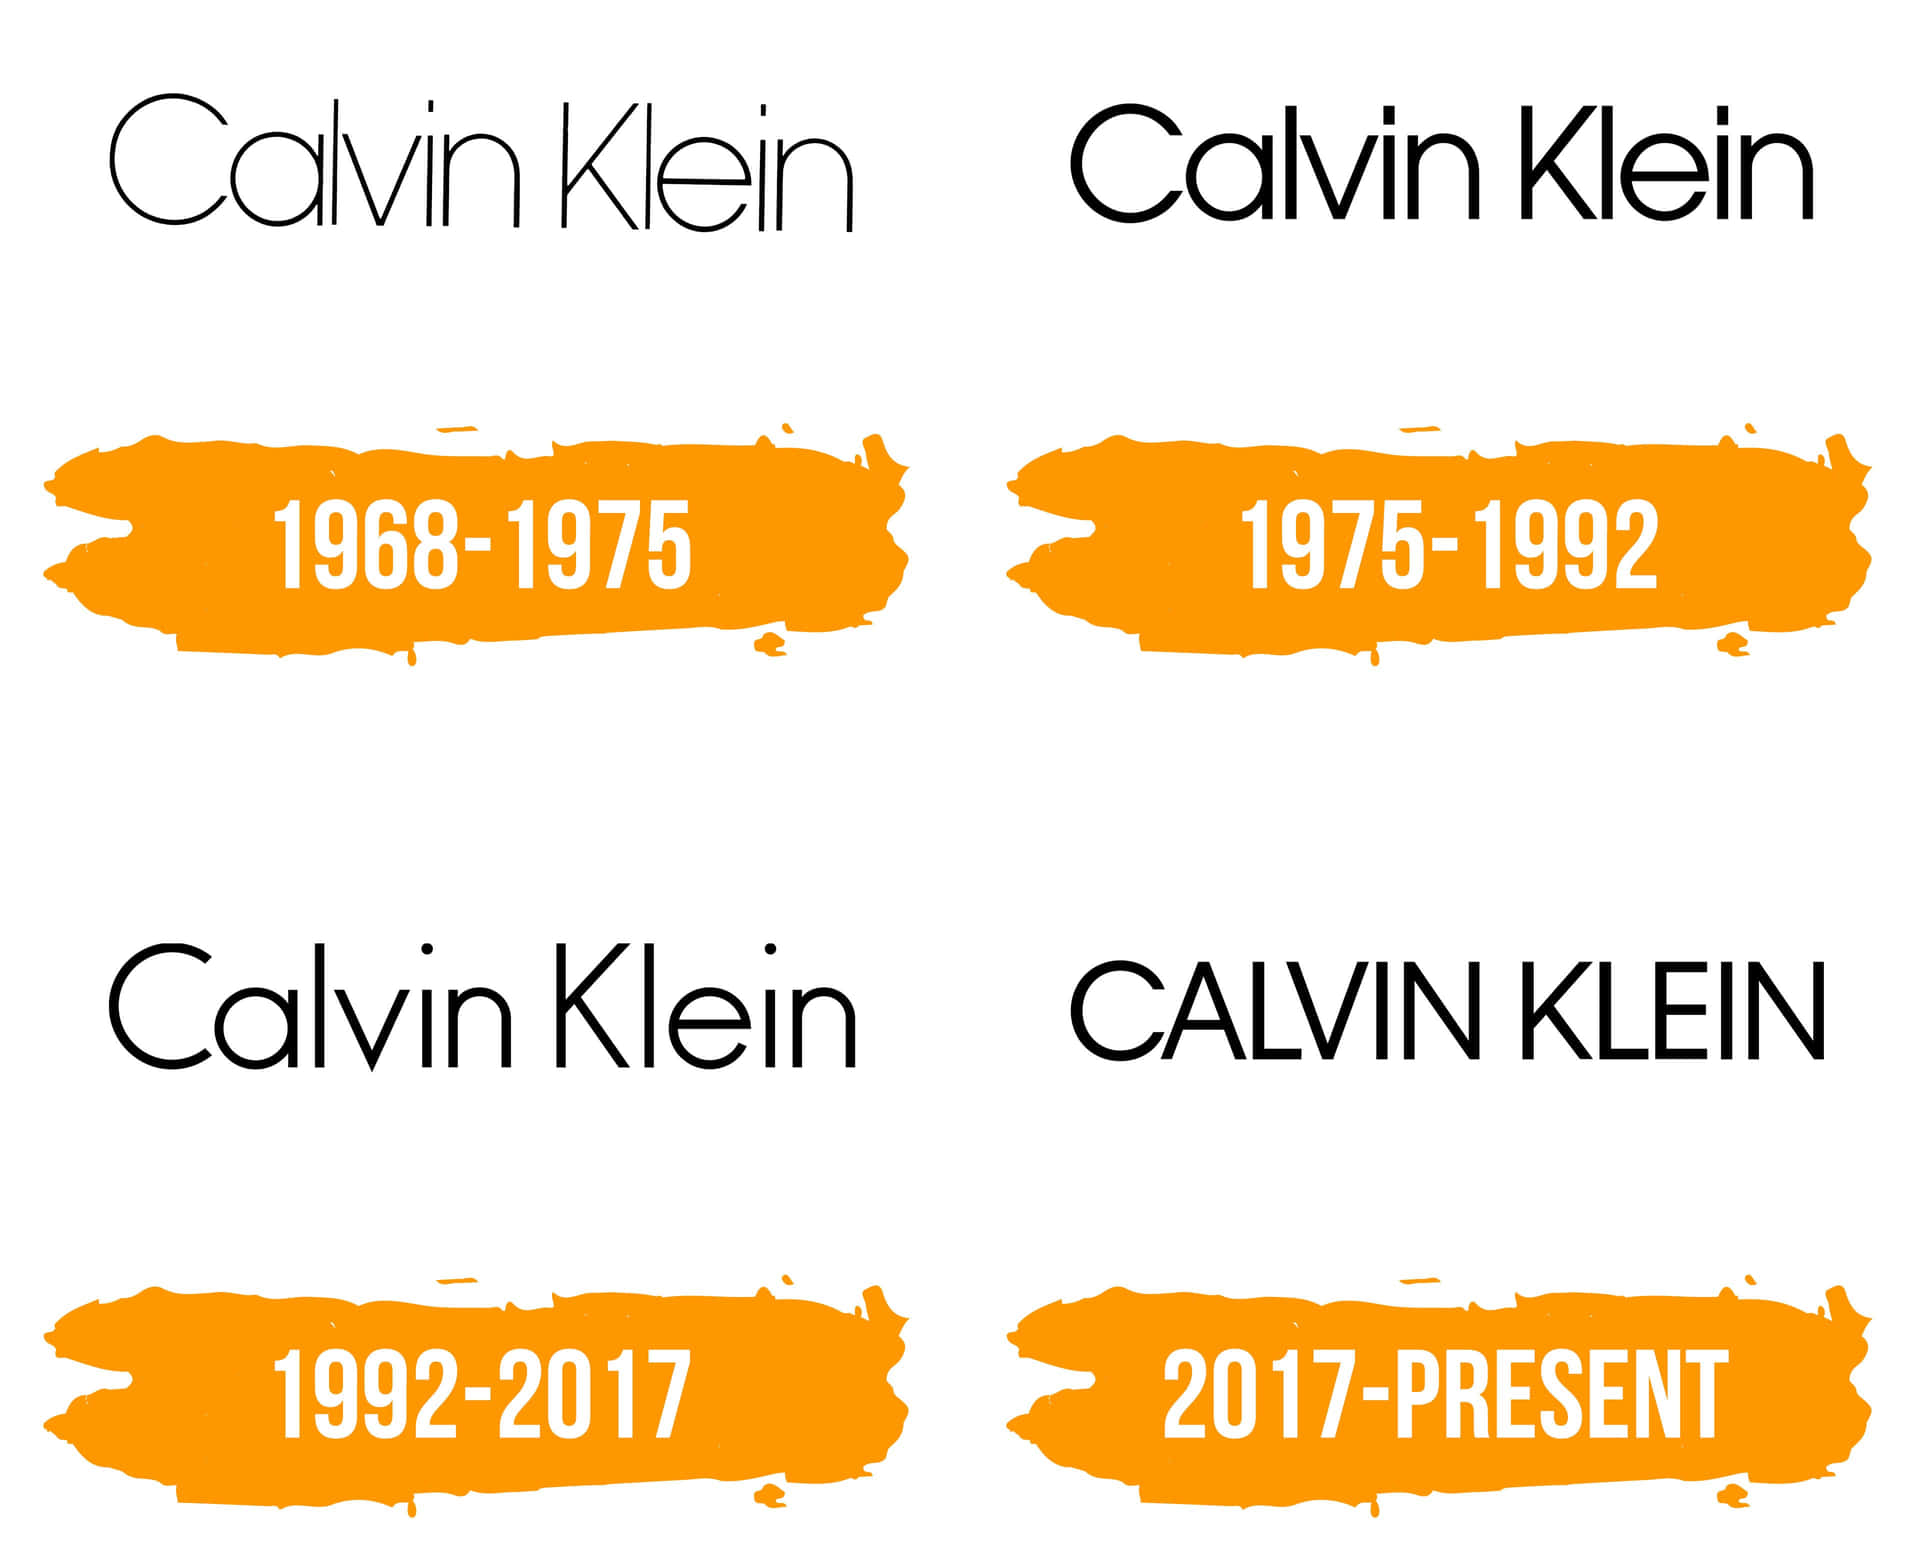 Download Express your style with Calvin Klein | Wallpapers.com